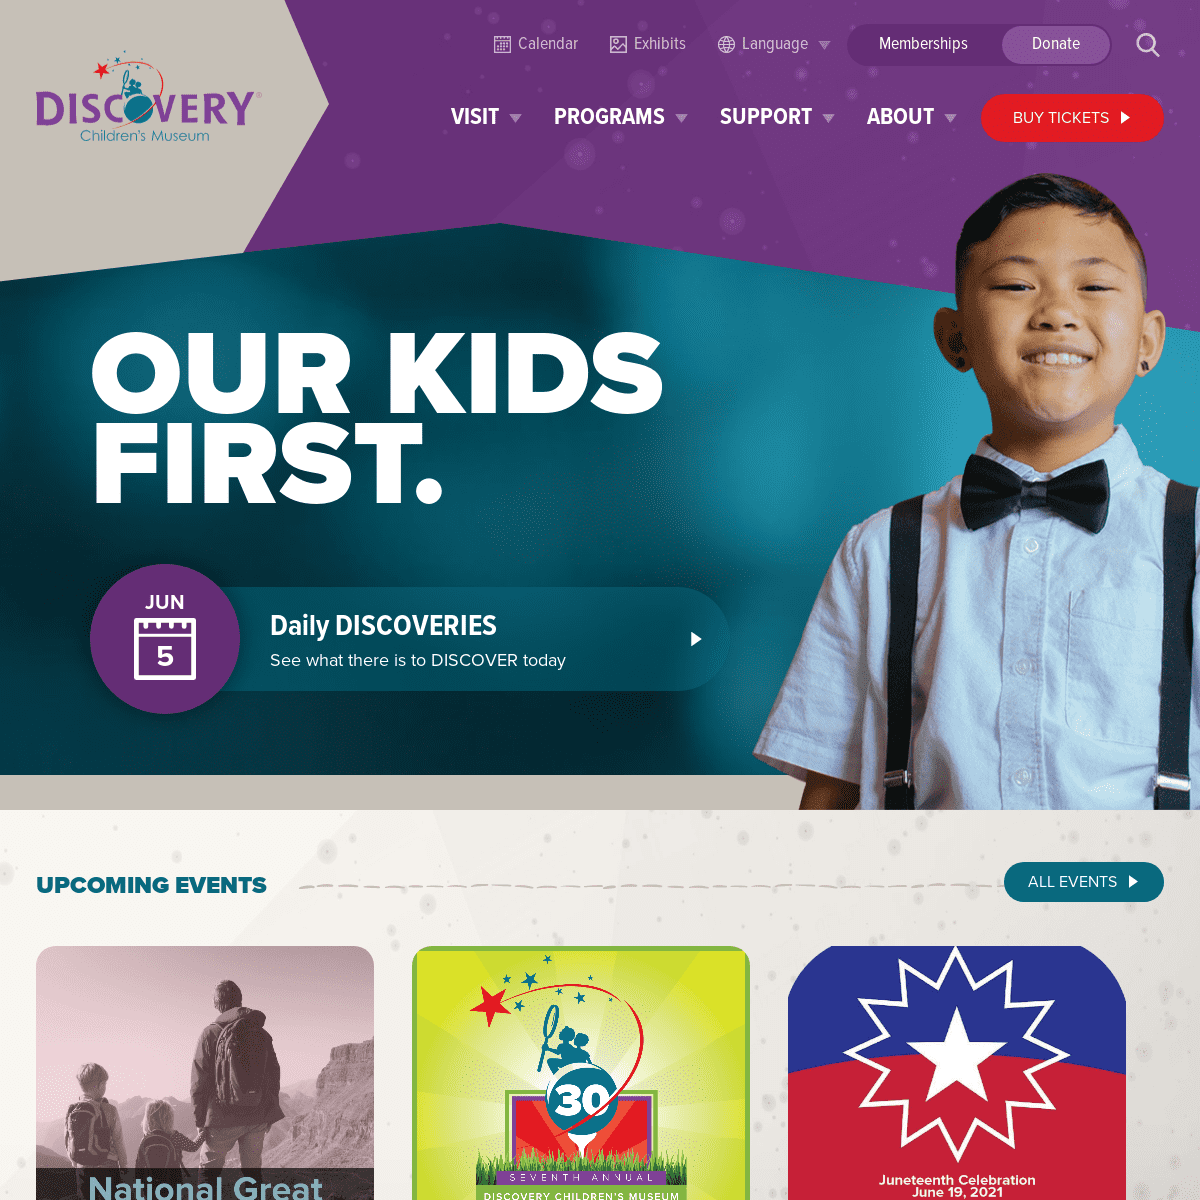 A complete backup of https://discoverykidslv.org